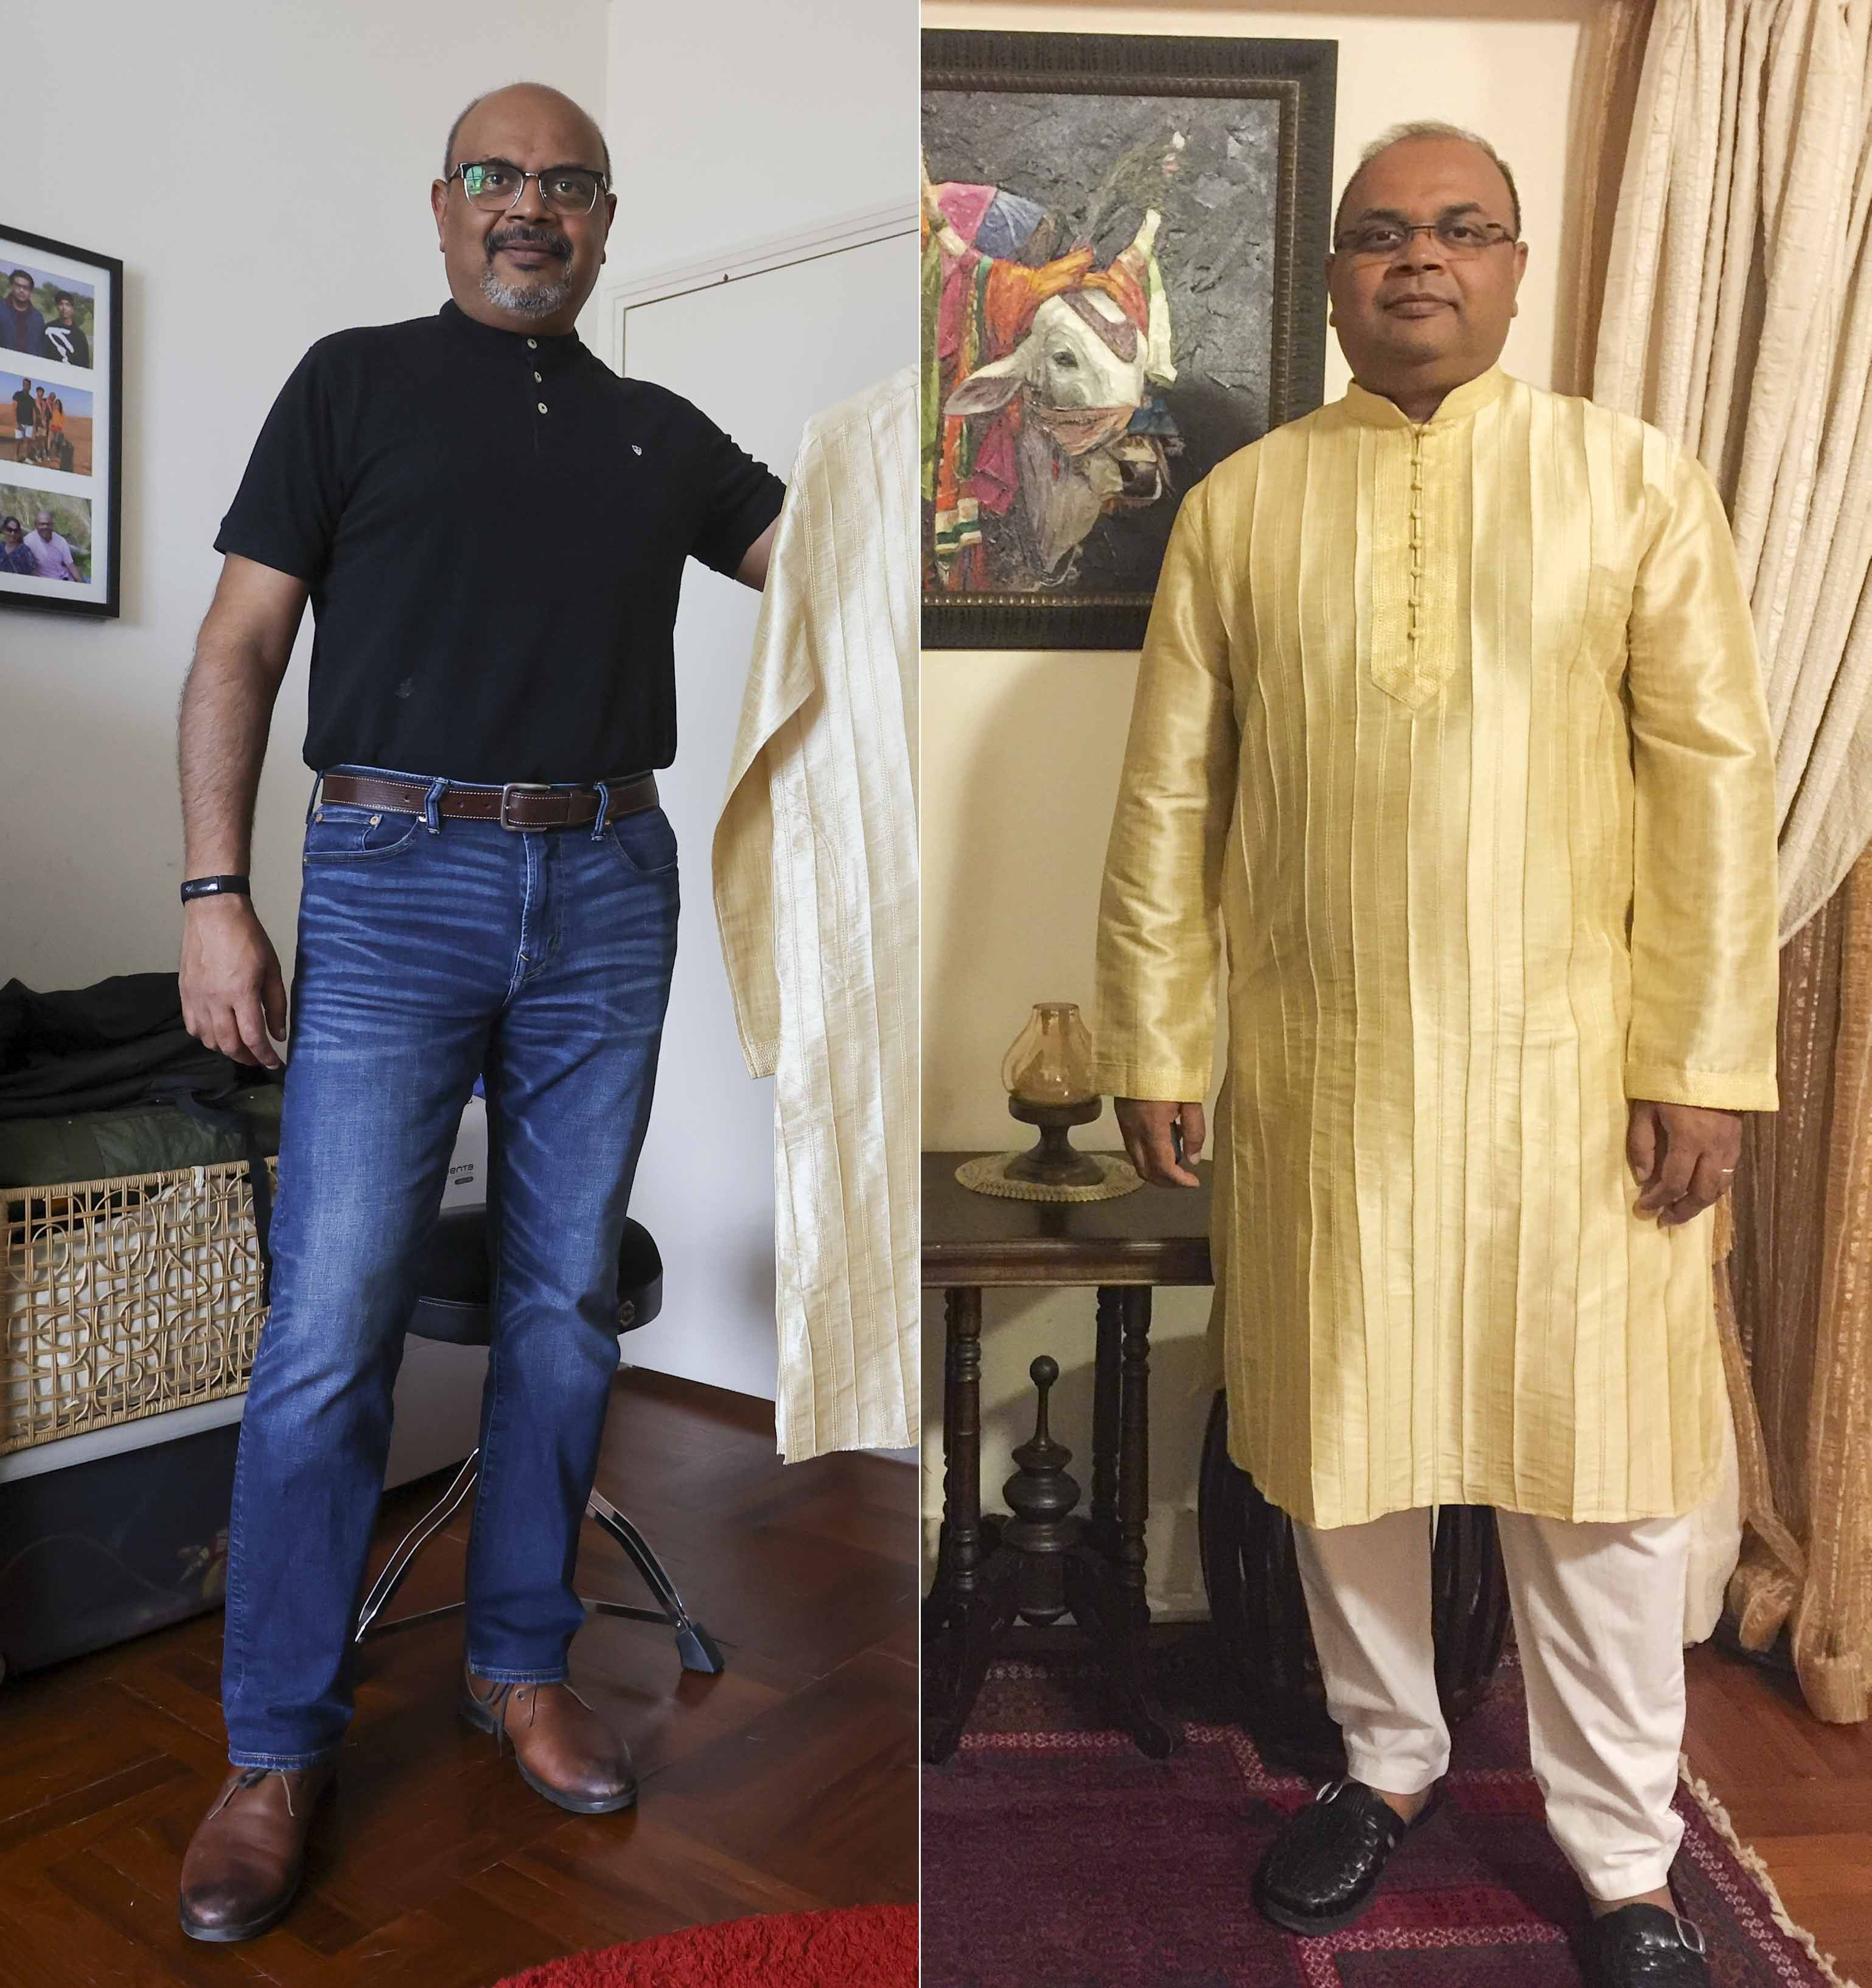 Hong Kong banker Sumanta Panigrahi now, at 85kg, and in 2017 before he started losing weight. Photo: Handout